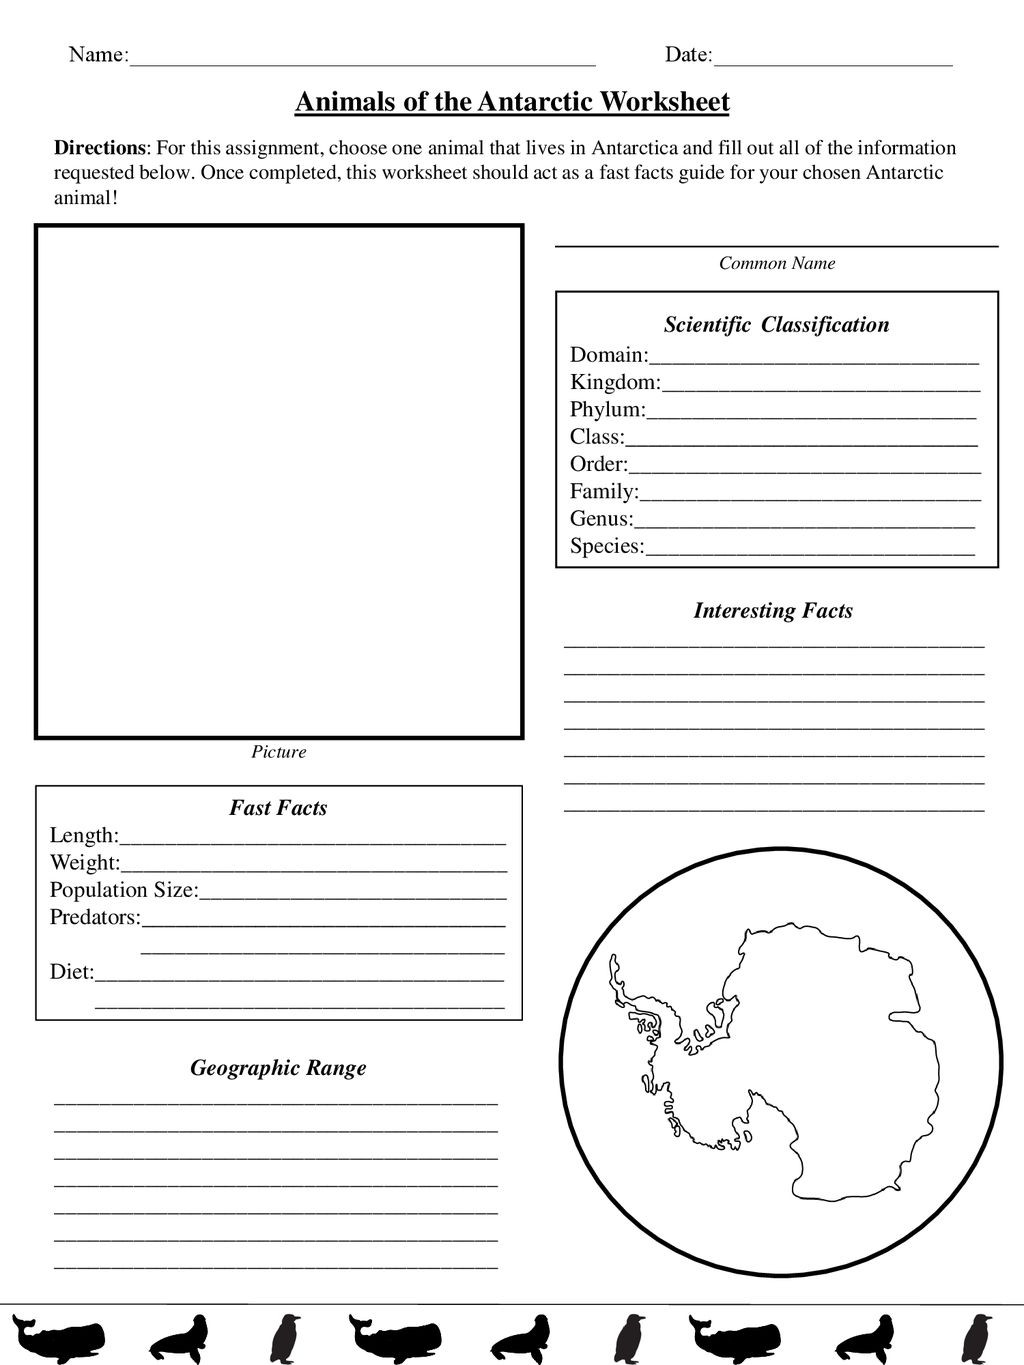 Domains and Kingdoms Worksheet Animals Of the Antarctic Worksheet Scientific Classification